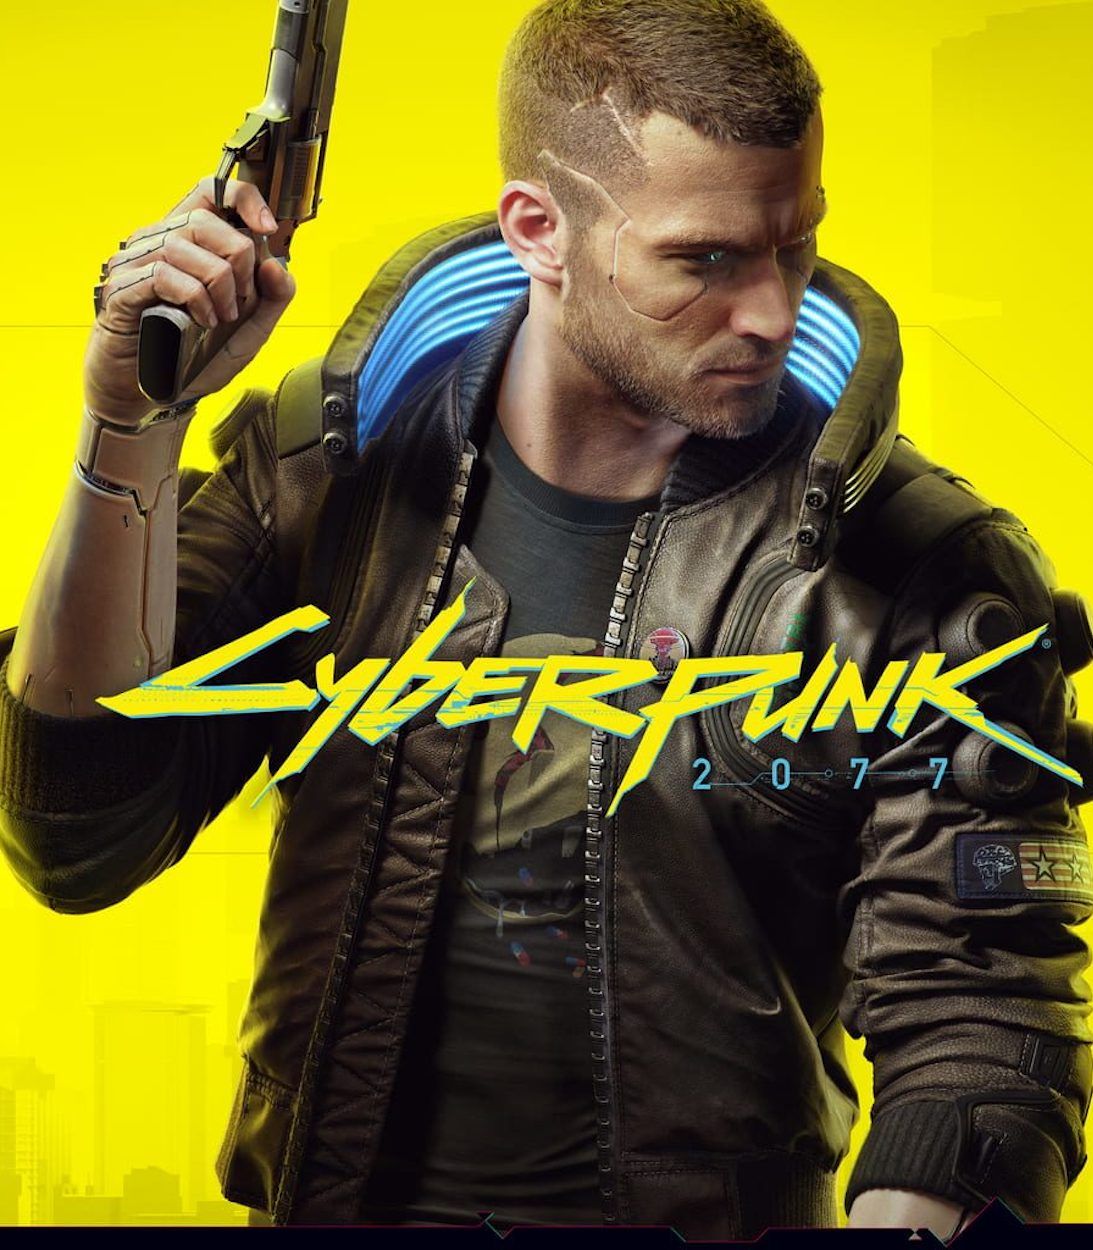 One of the cover images for CD Projekt Red's upcoming game, Cyberpunk 2077